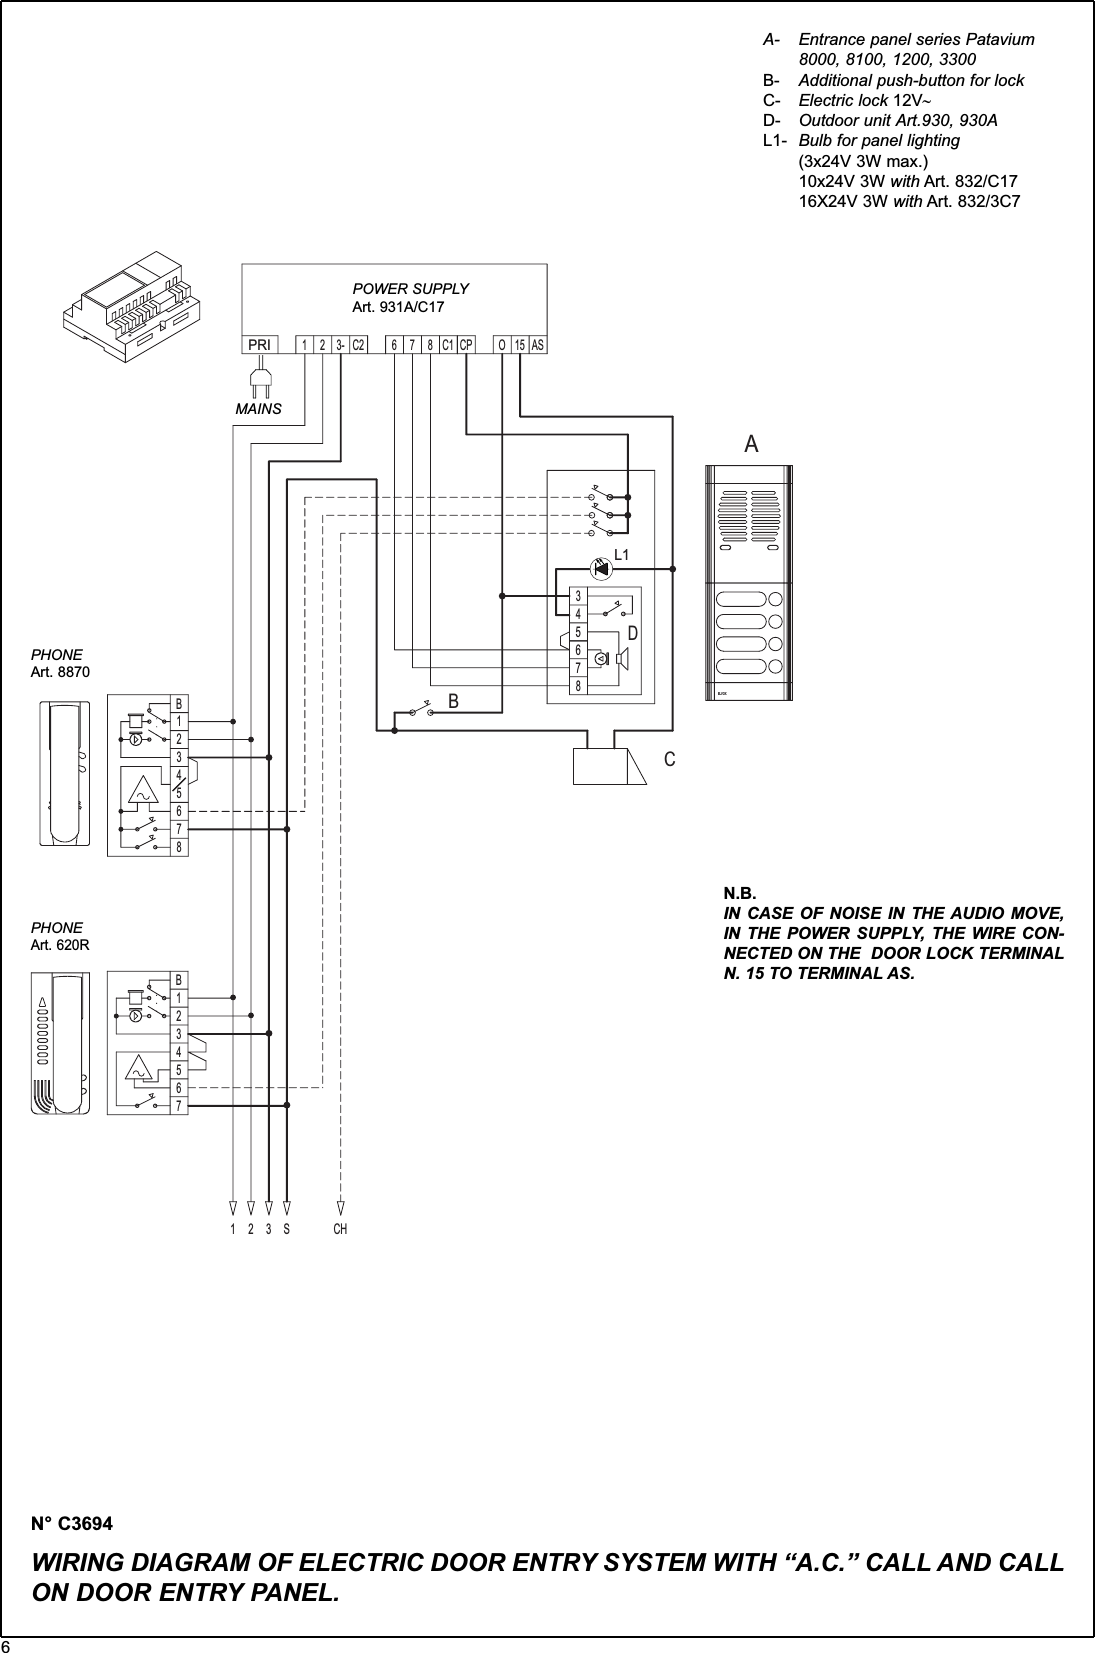 Page 6 of 8 - 931 Wiring Diagram